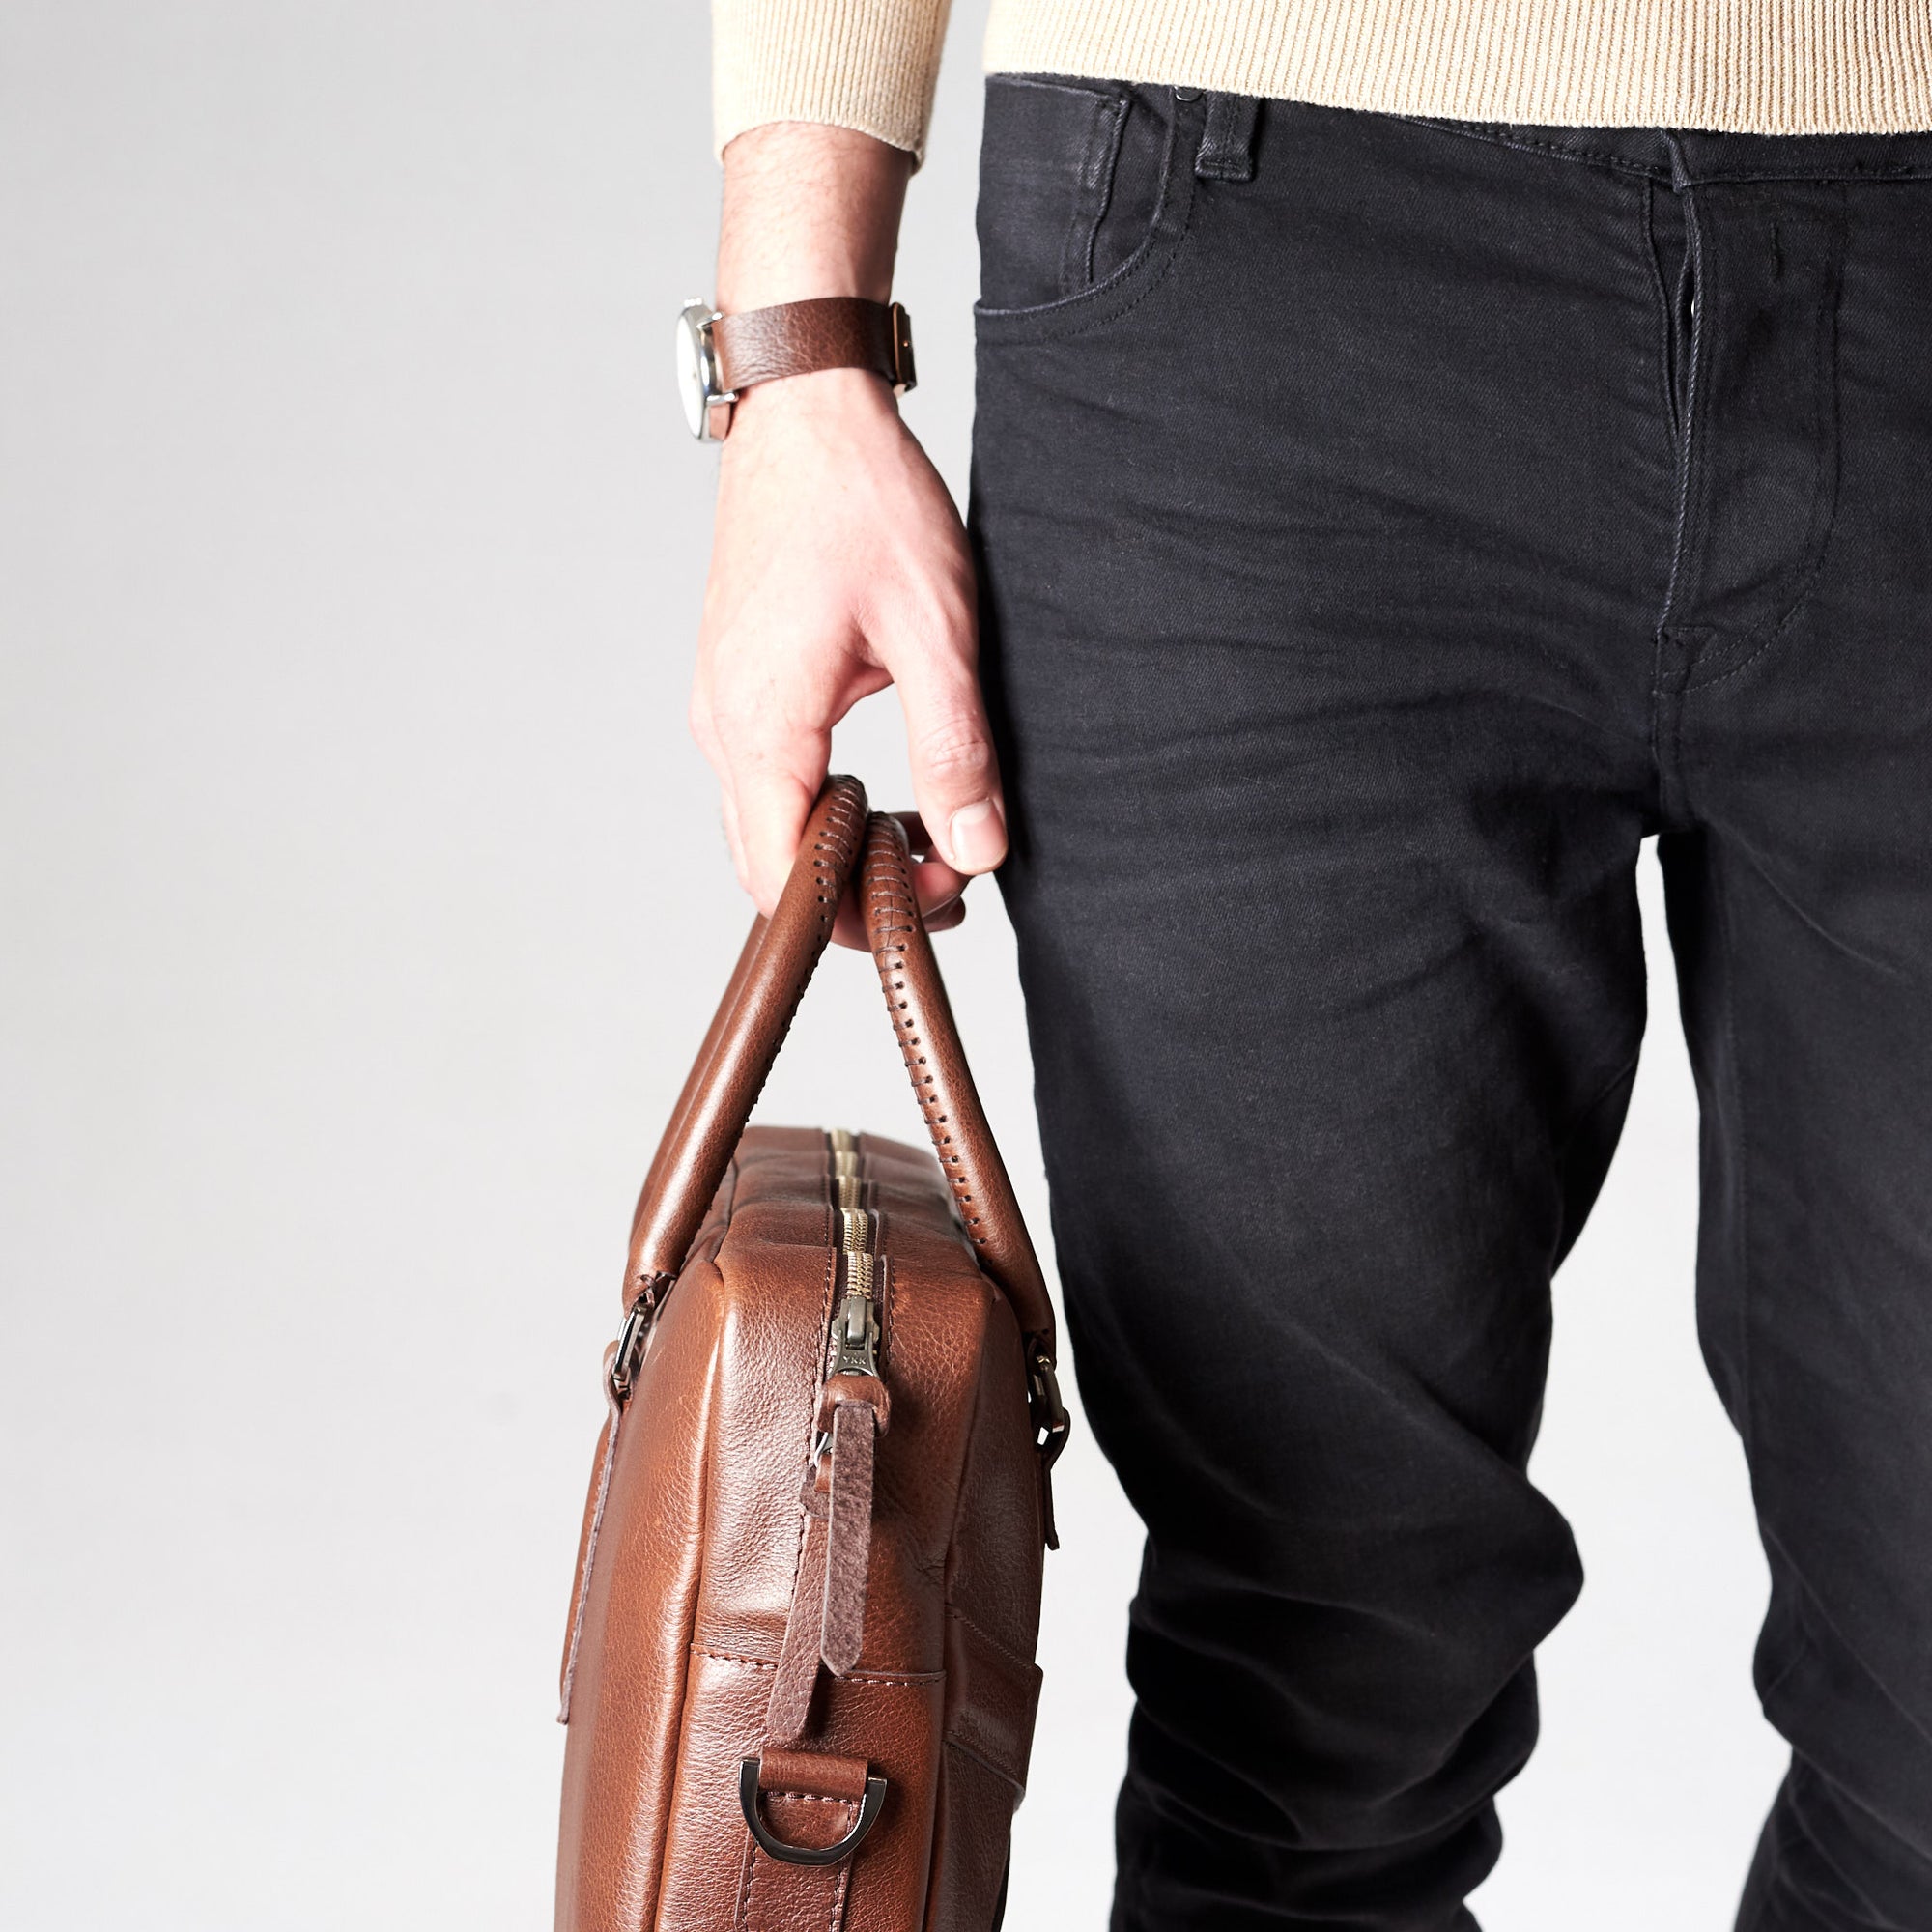 Style side view of model holding workbag. Brown leather briefcase laptop bag for men. Gazeli laptop briefcase by Capra Leather.